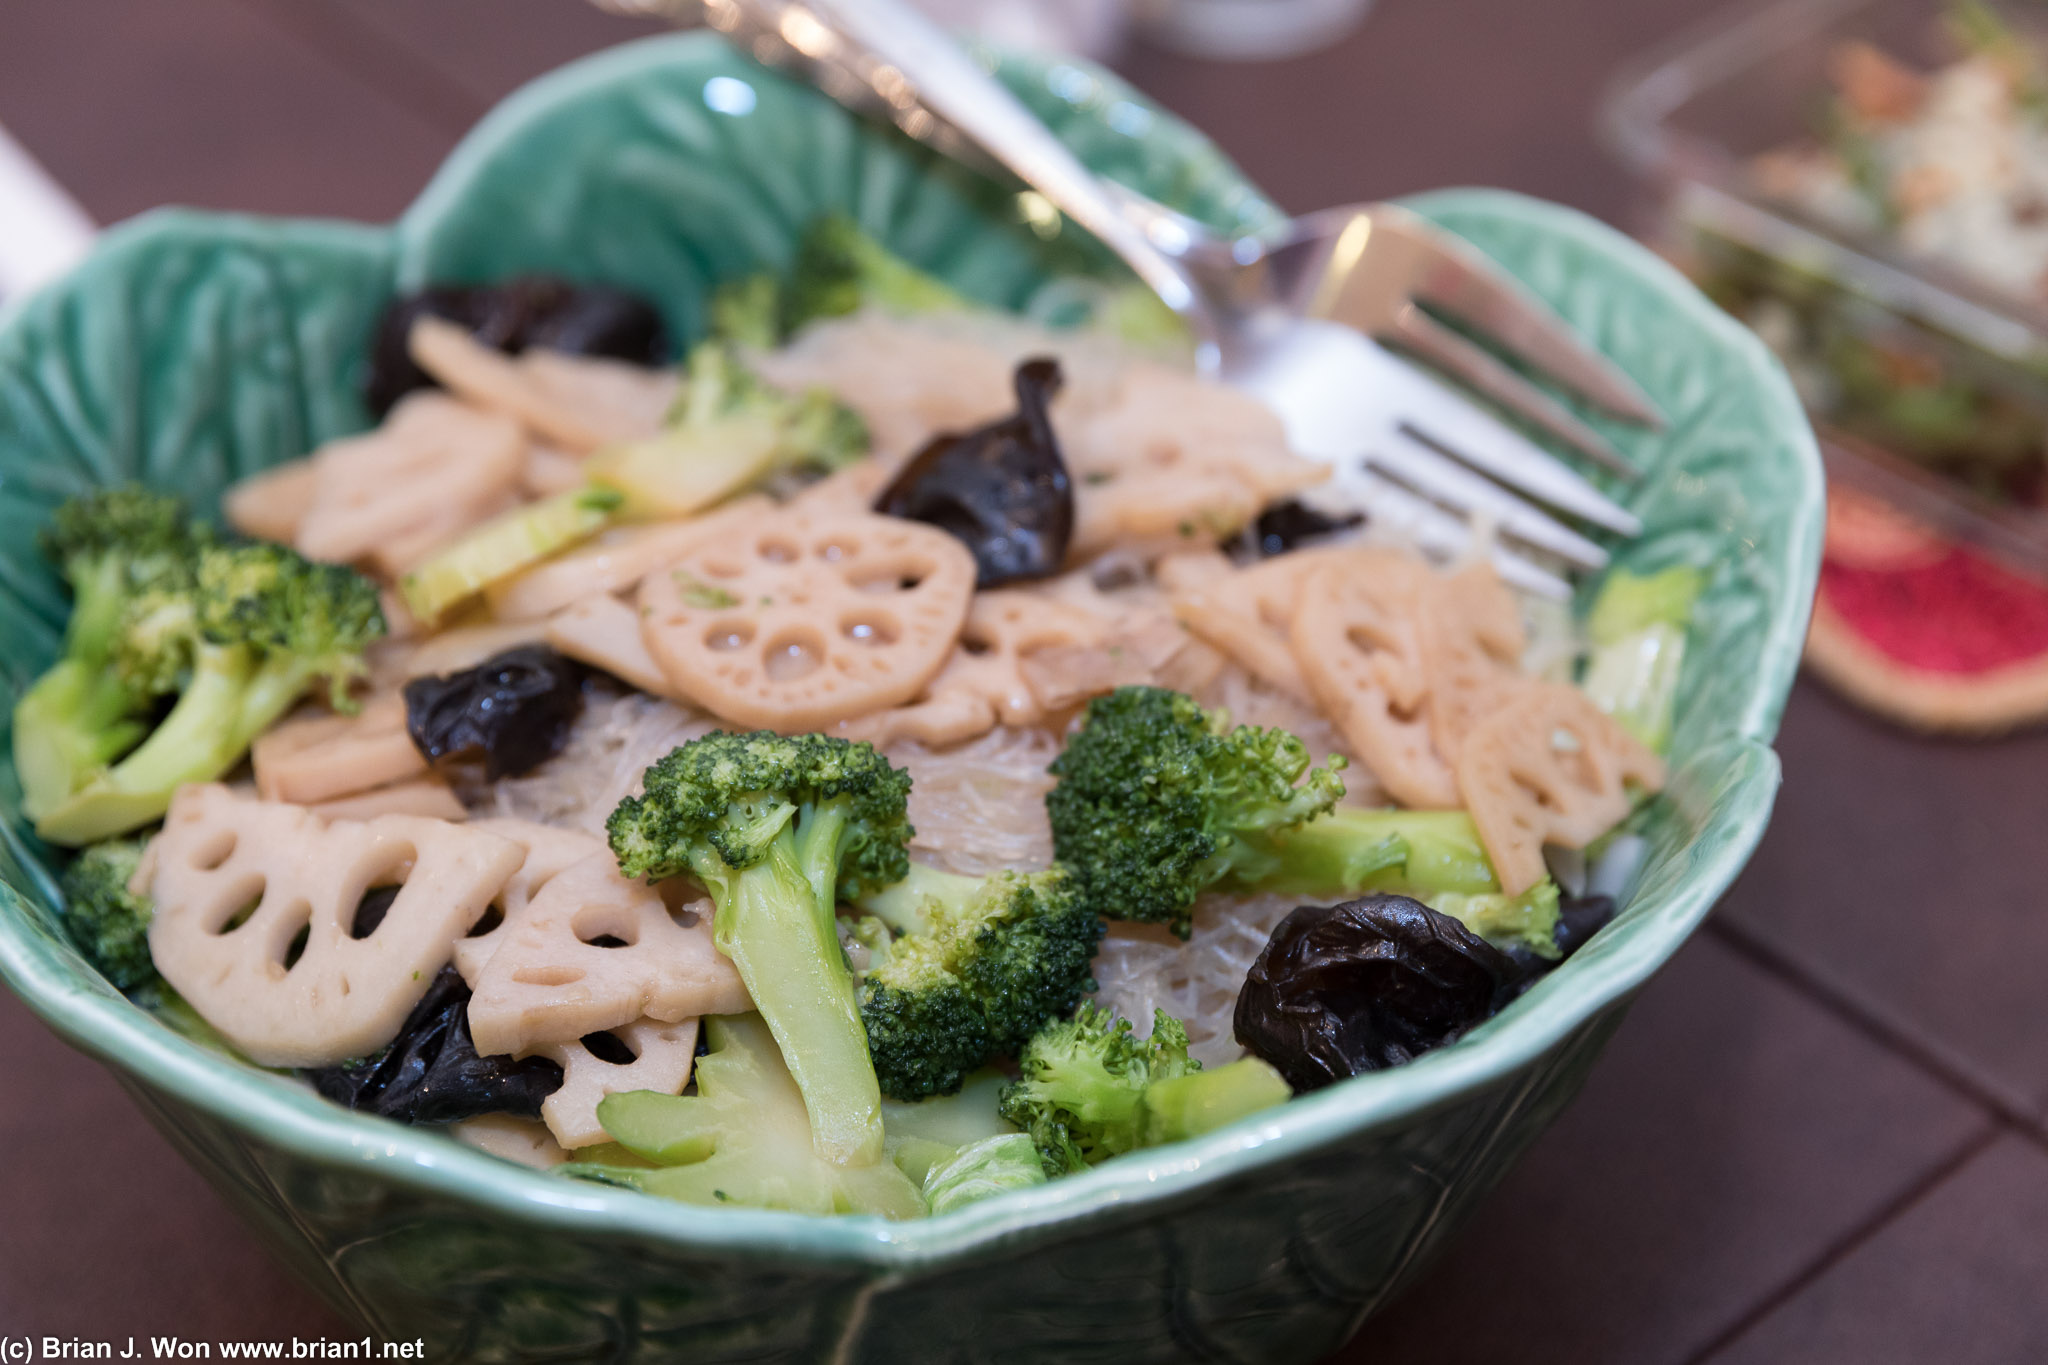 Glass noodles with broccoli, mushroom, and lotus root!